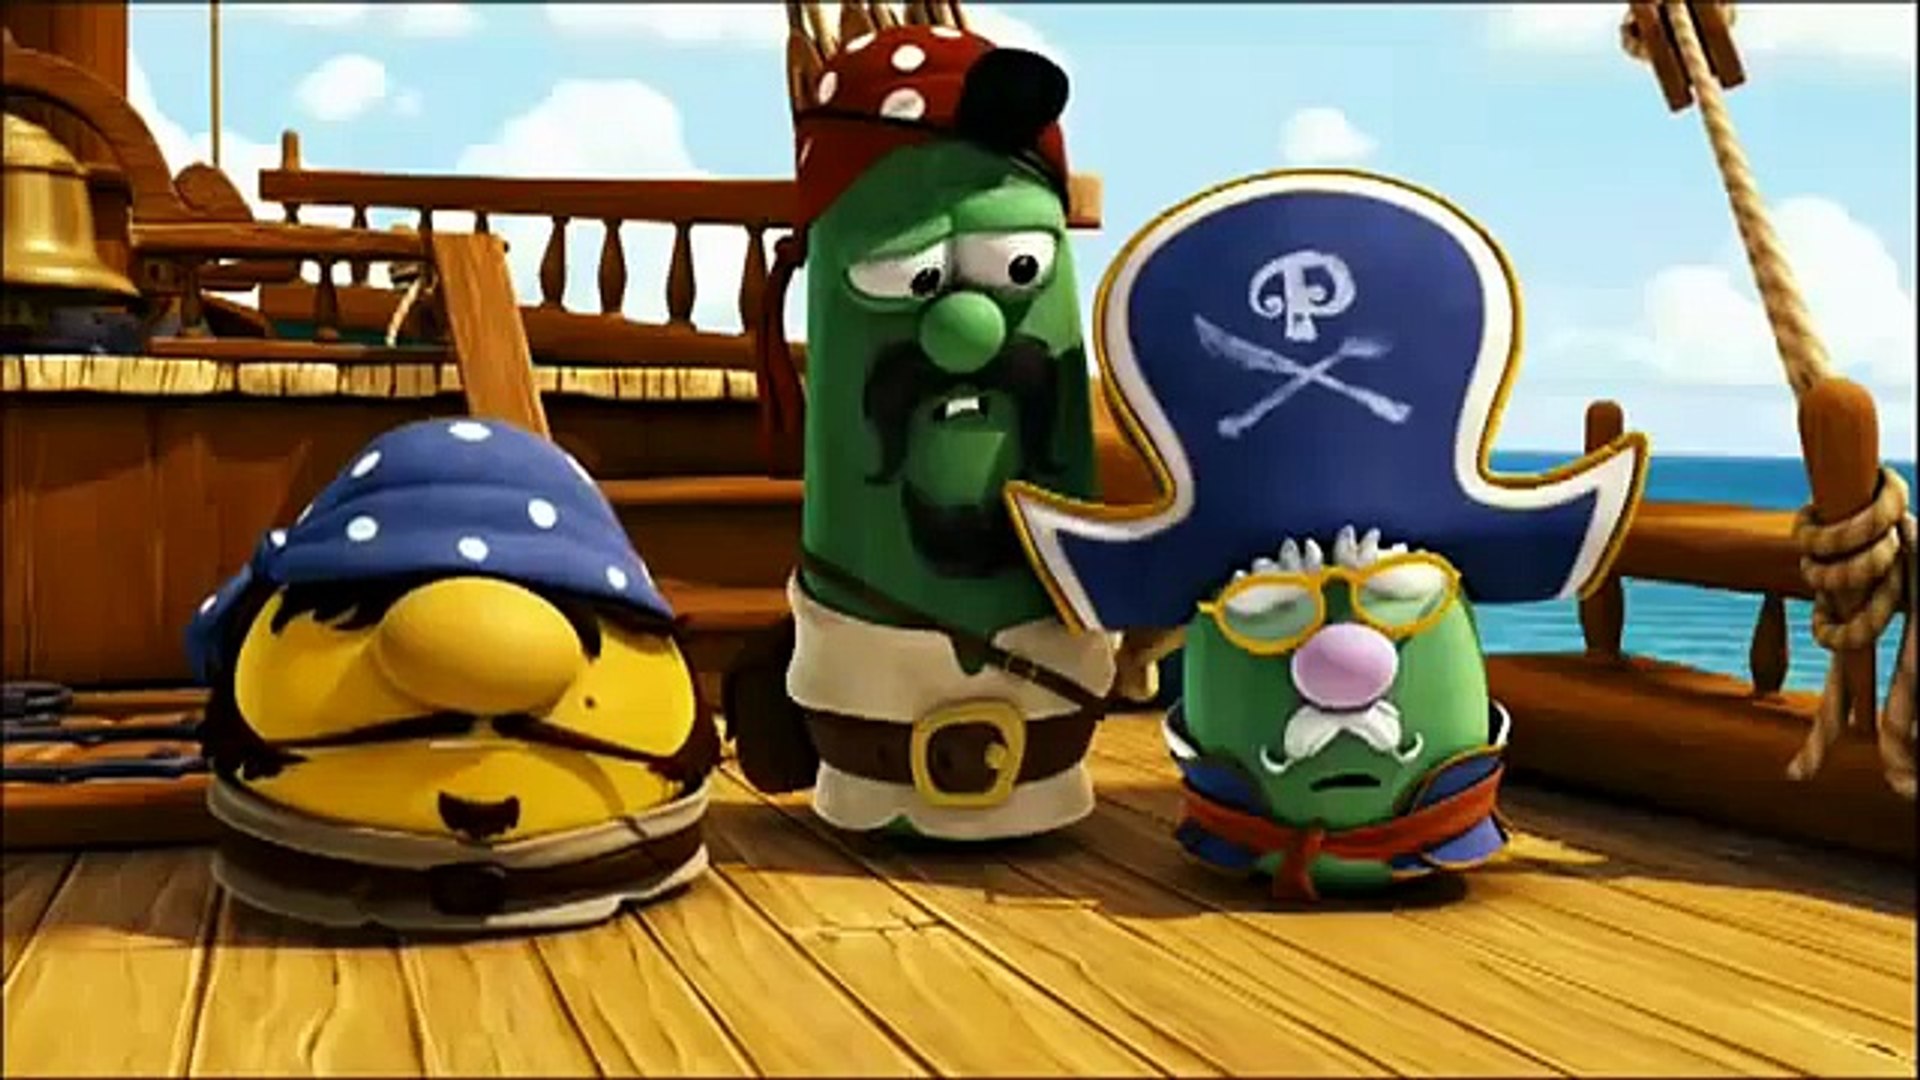 A Veggie Tales Movie - The Pirates Who Don't Do Anything - Movie